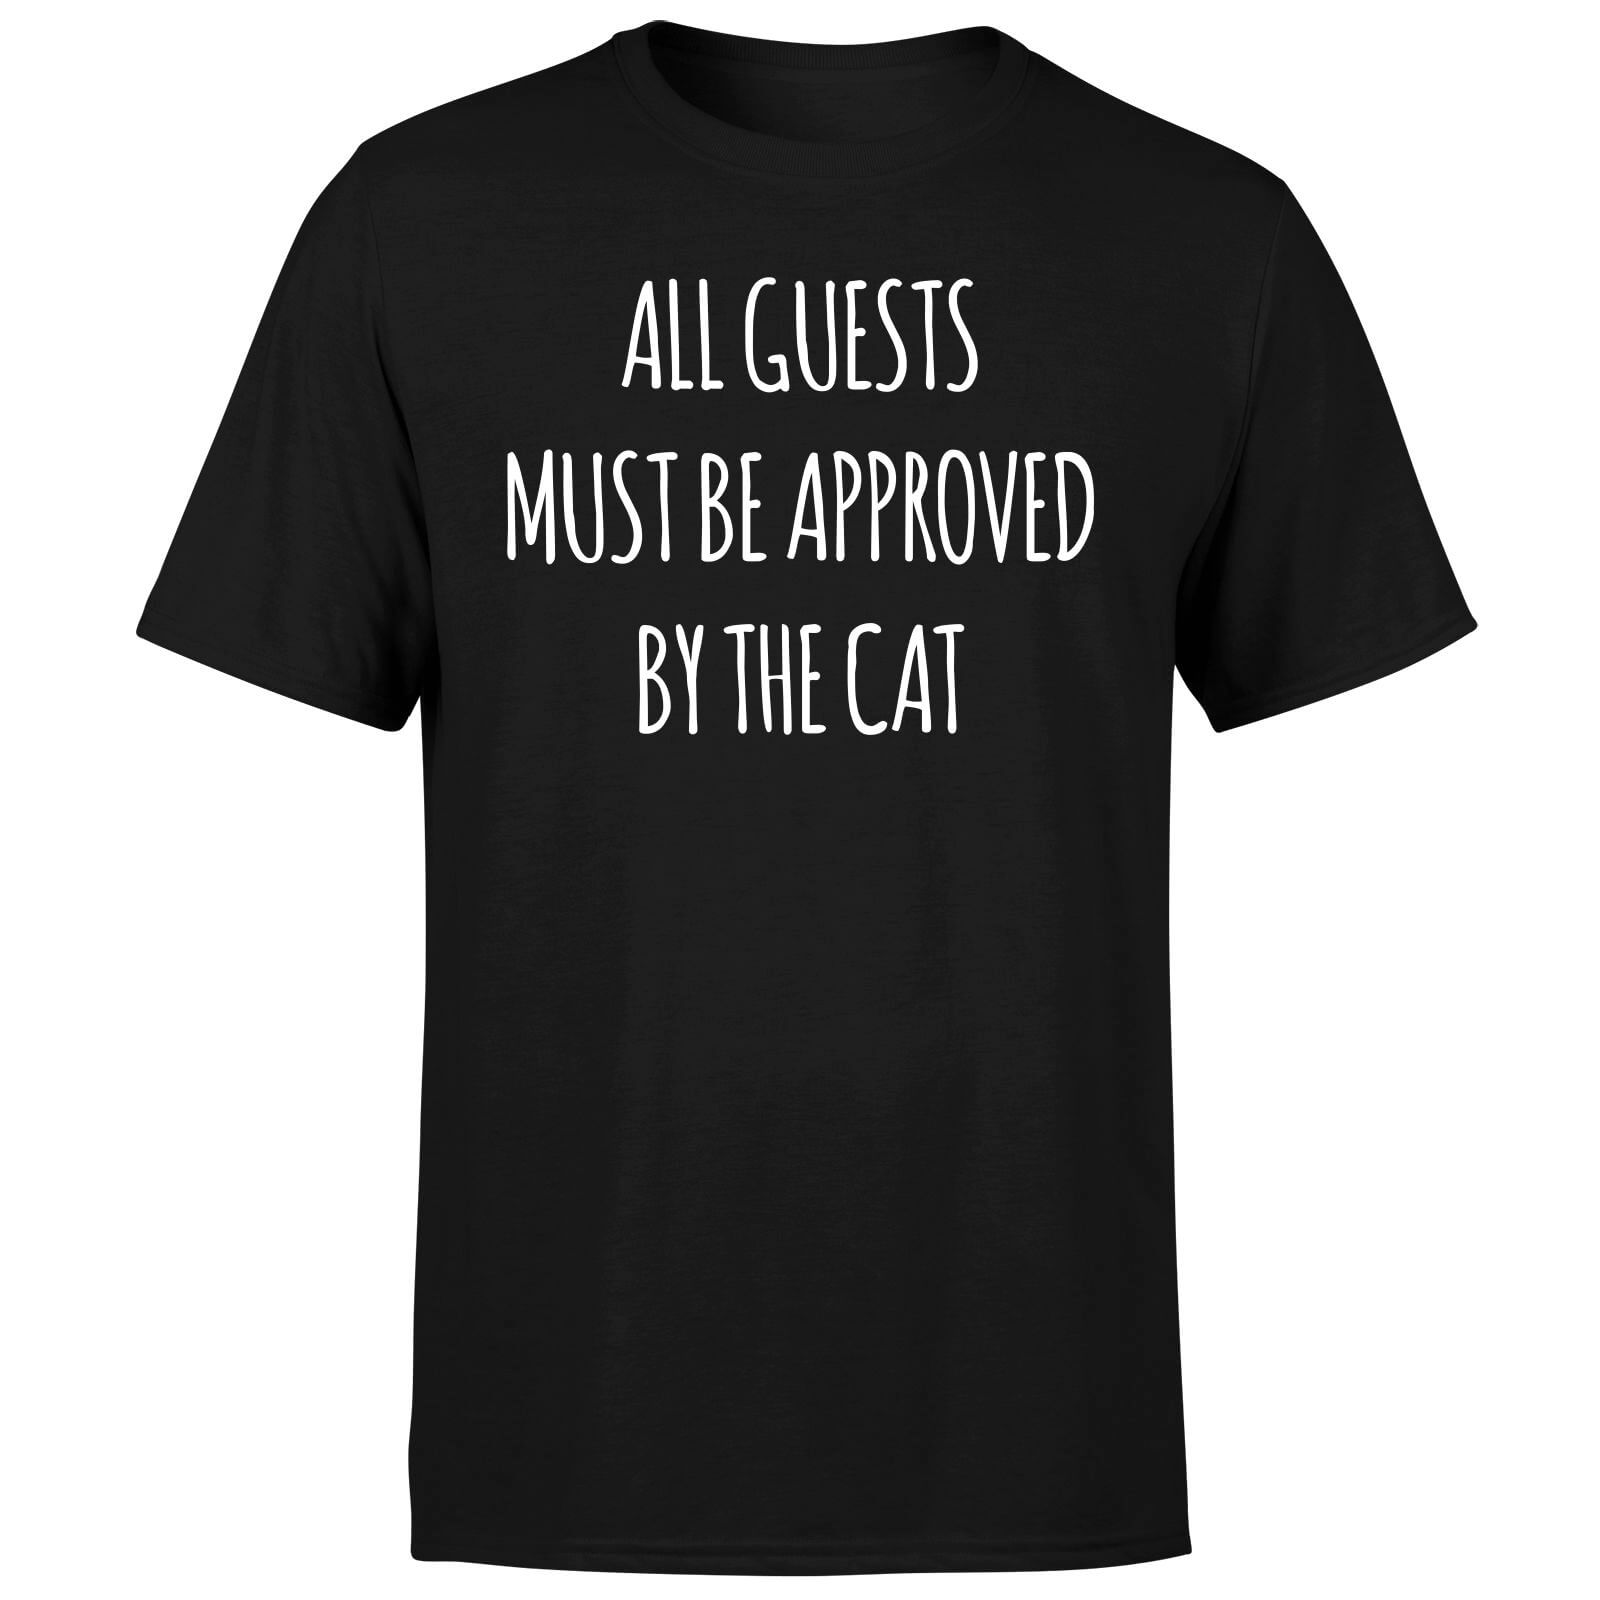 All Guests Must Be Approved By The Cat T-Shirt - Black - S - Black